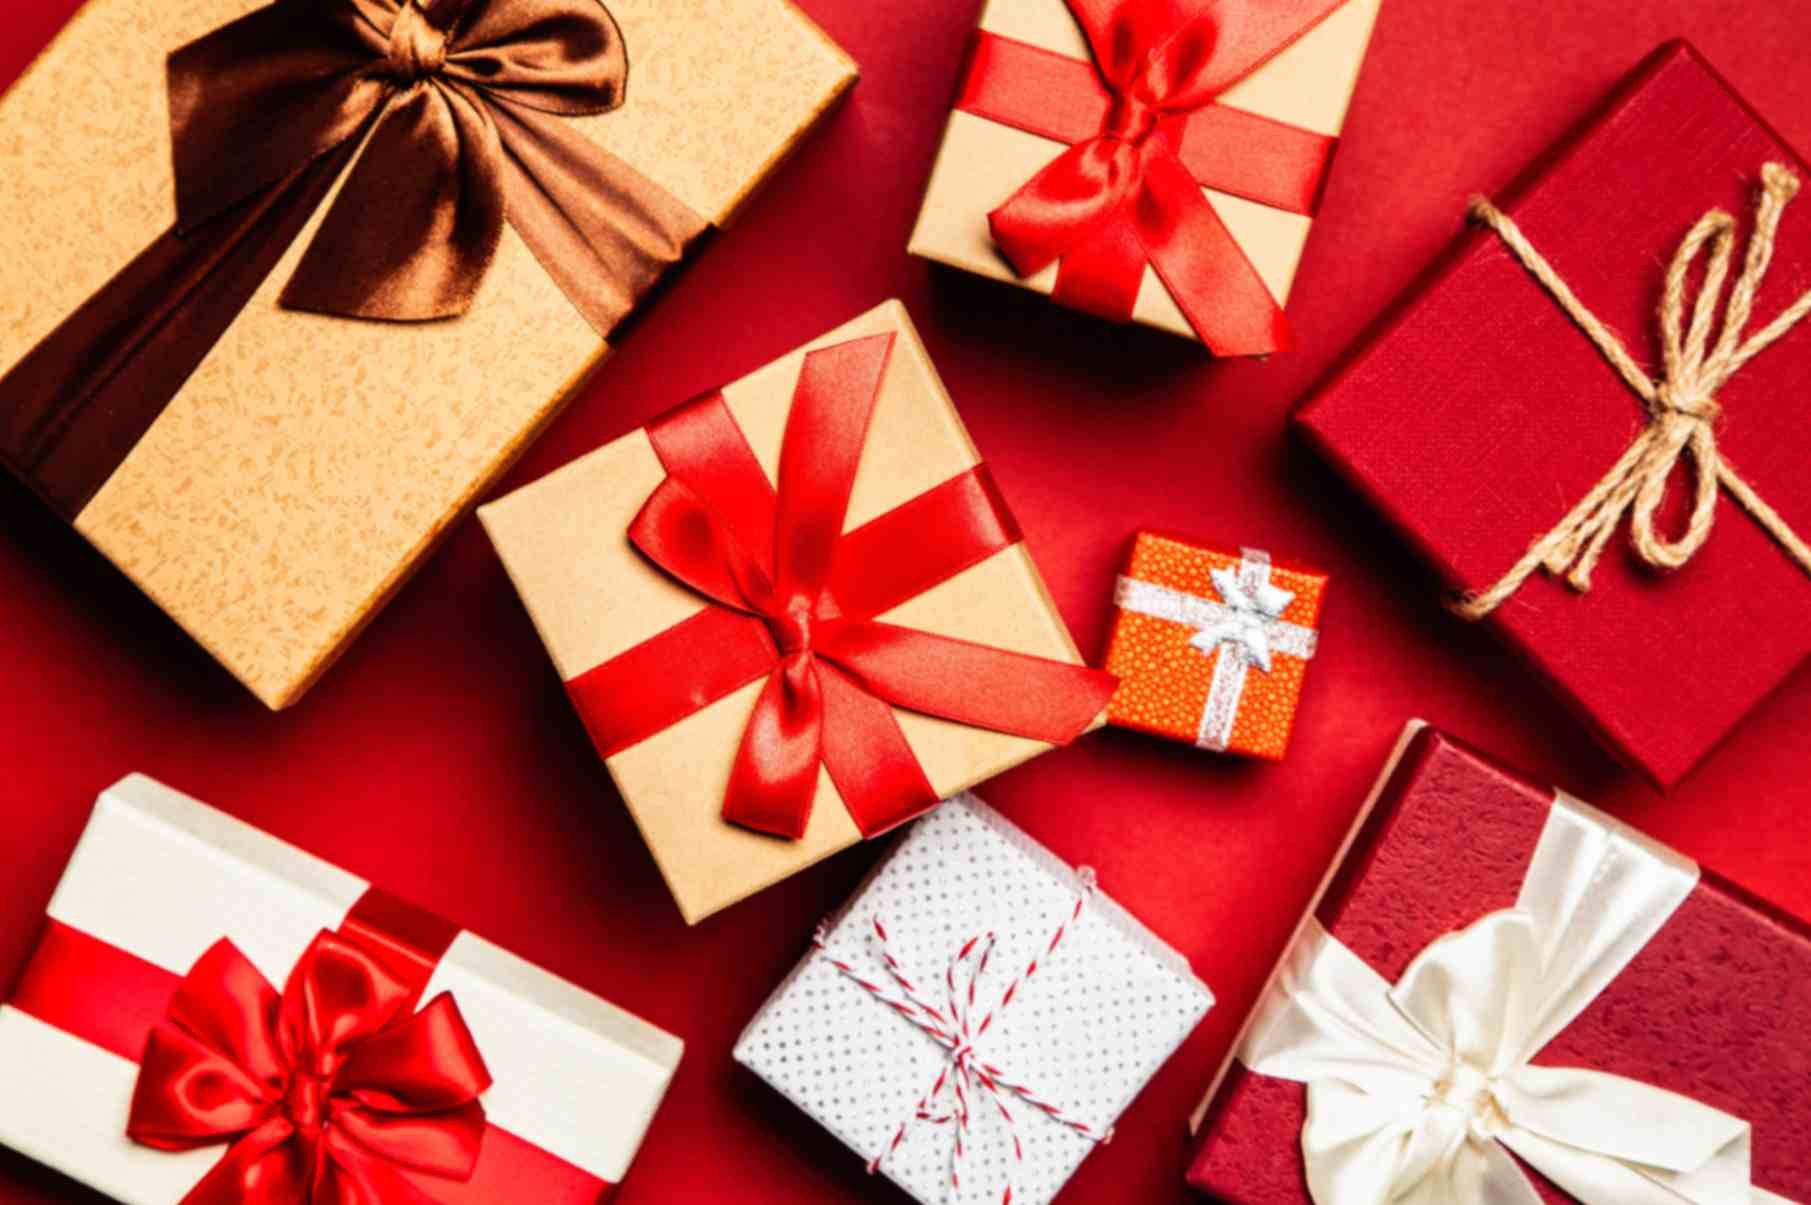 13 Unique Gift Wrapping Ideas To Try at Home